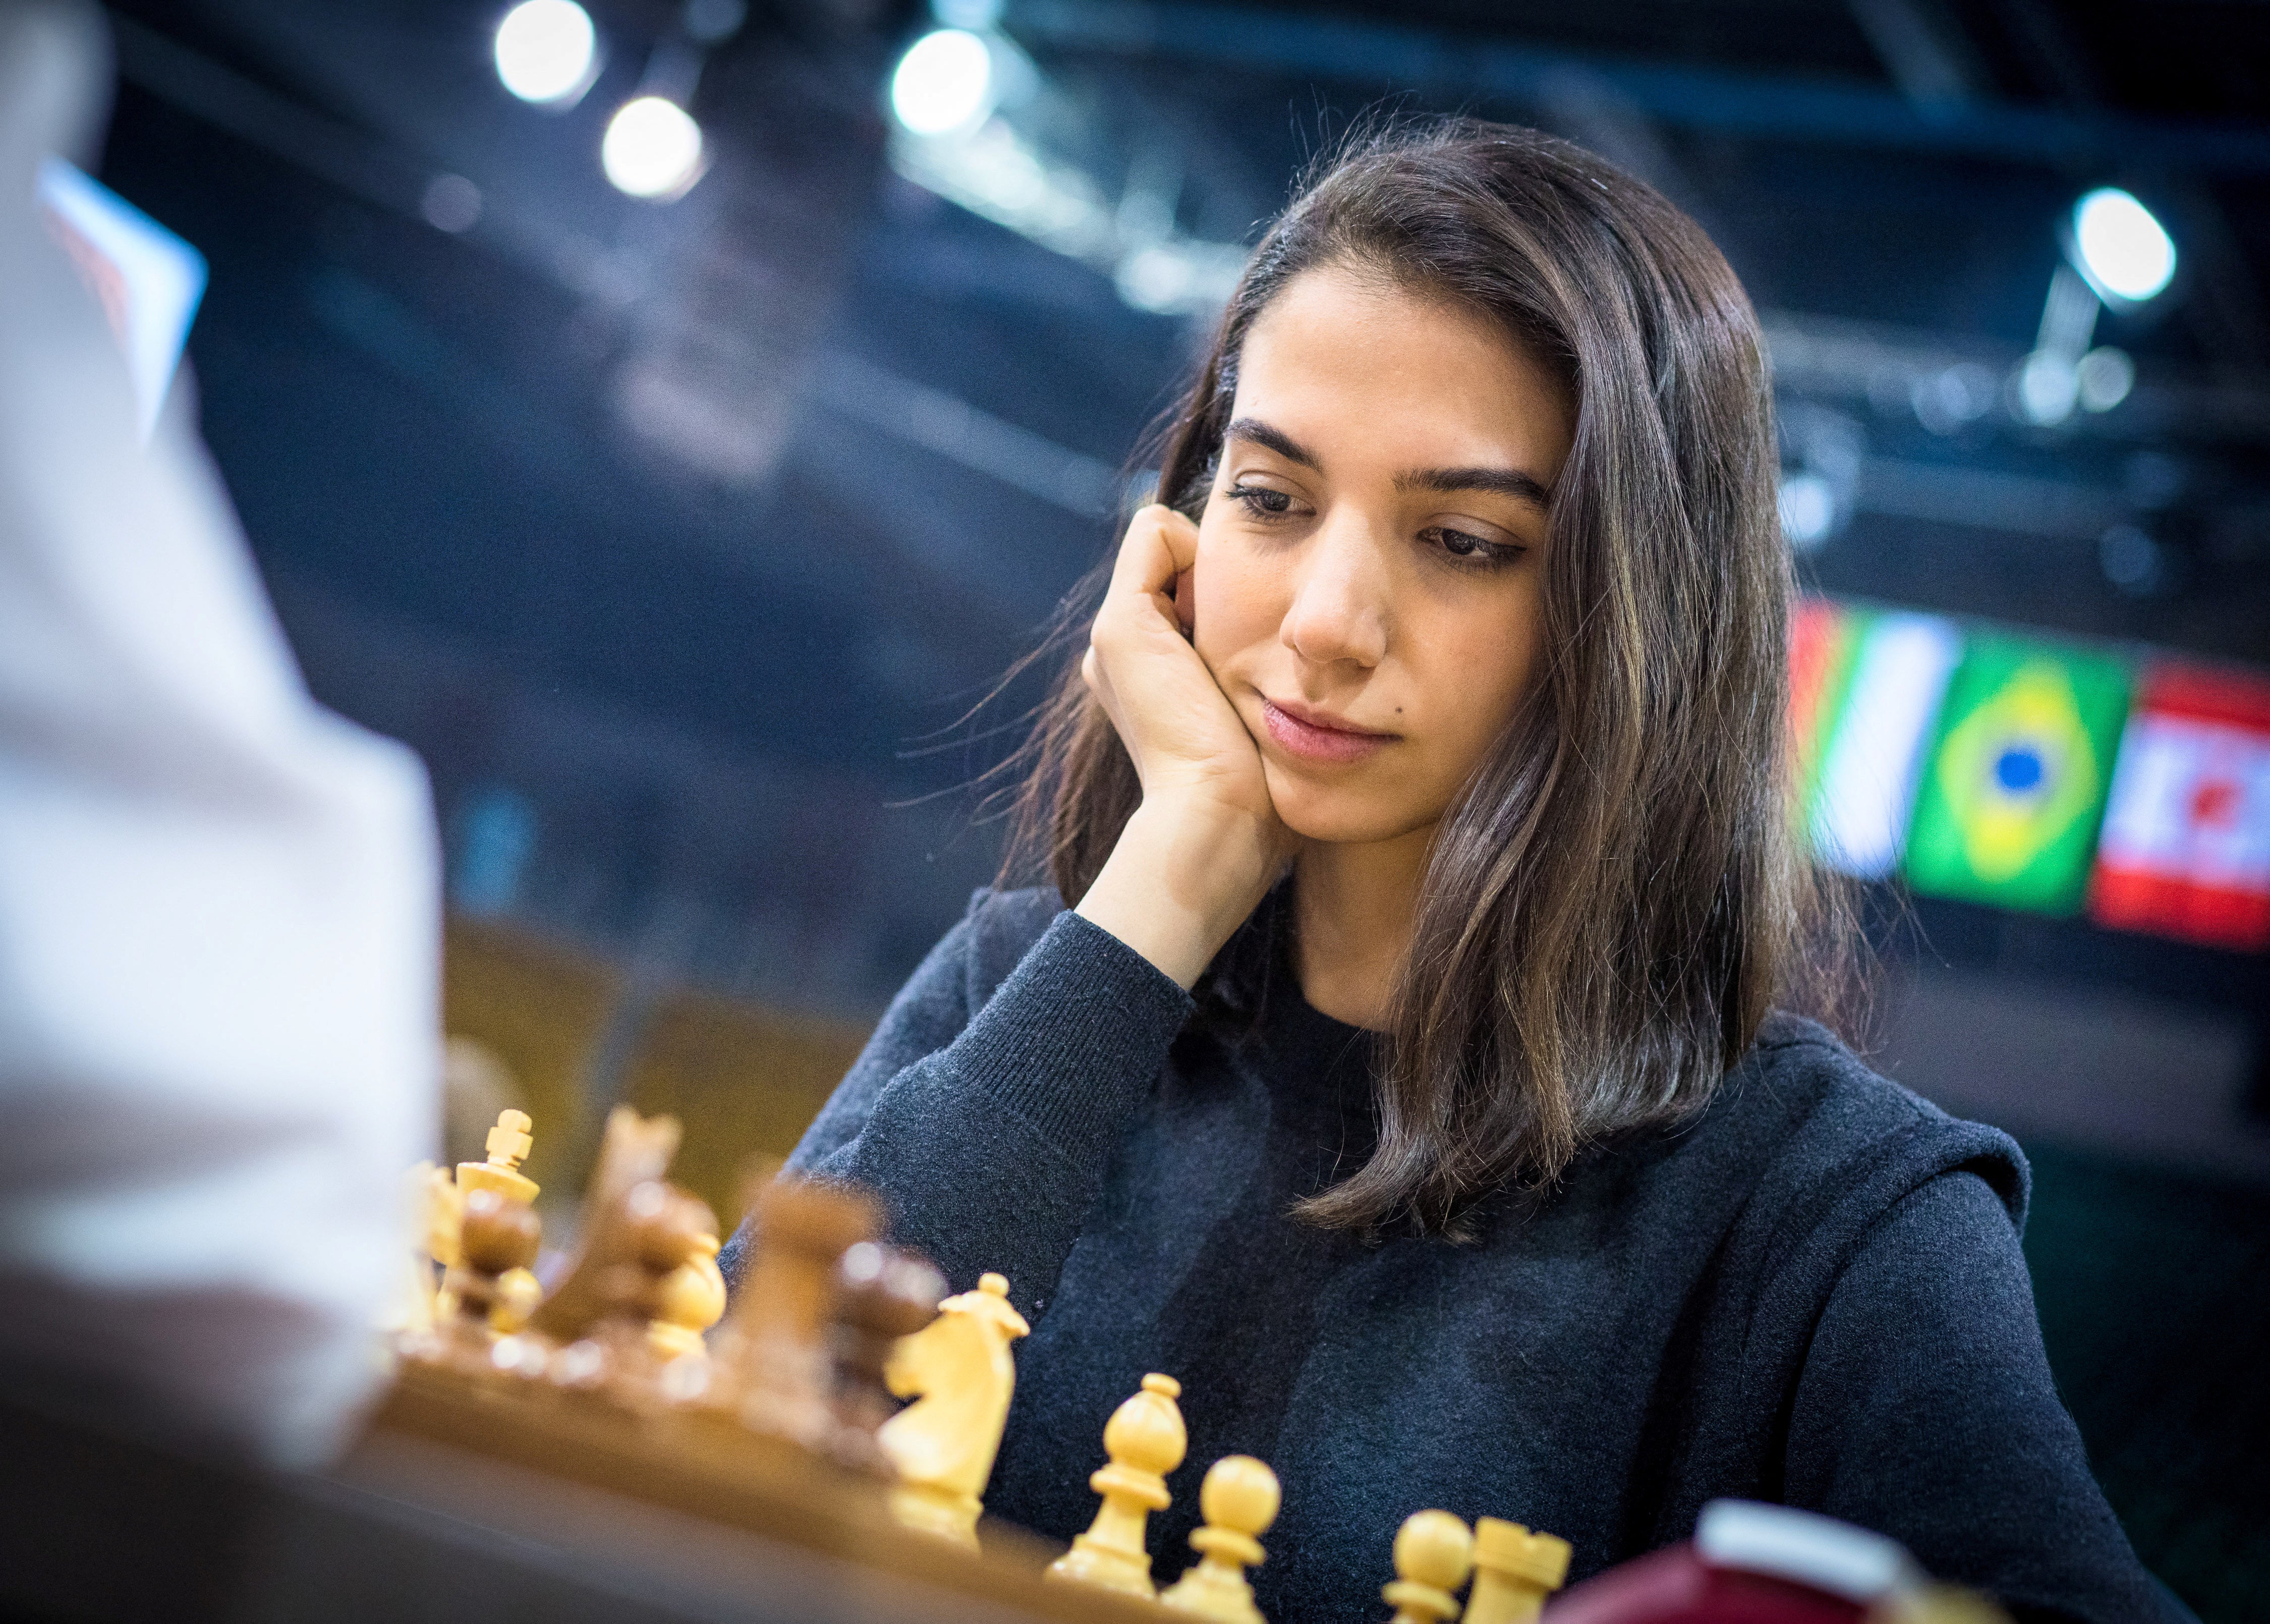 Sara Khadem competes without a hijab in the FIDE World Rapid and Blitz Chess Championships in Almaty, Kazakhstan